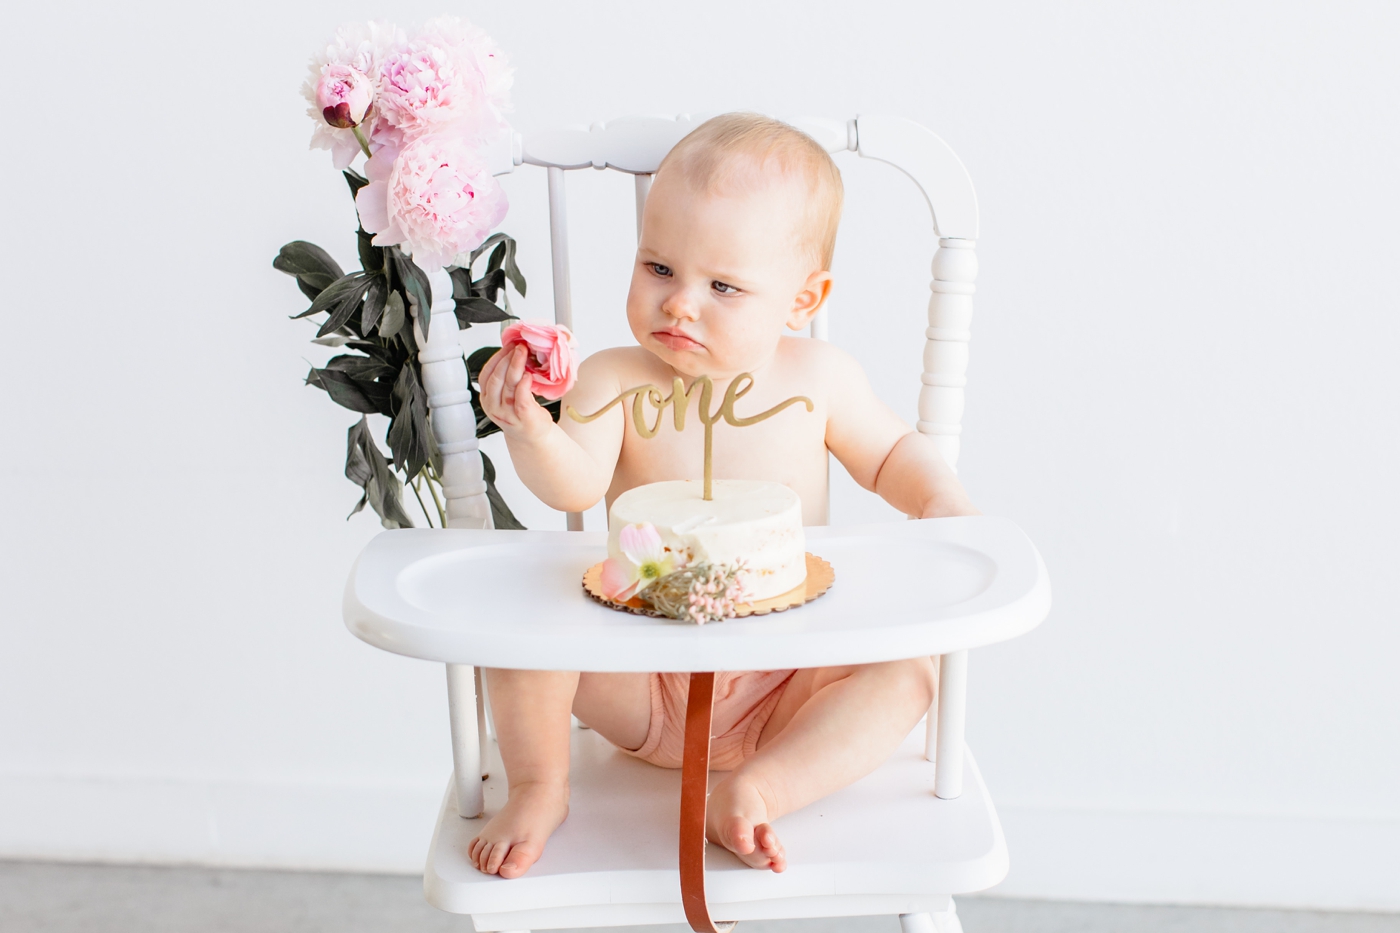 Toddler looking at flower from her cake during her first birthday milestone session. Photo by Sana Ahmed Photography.